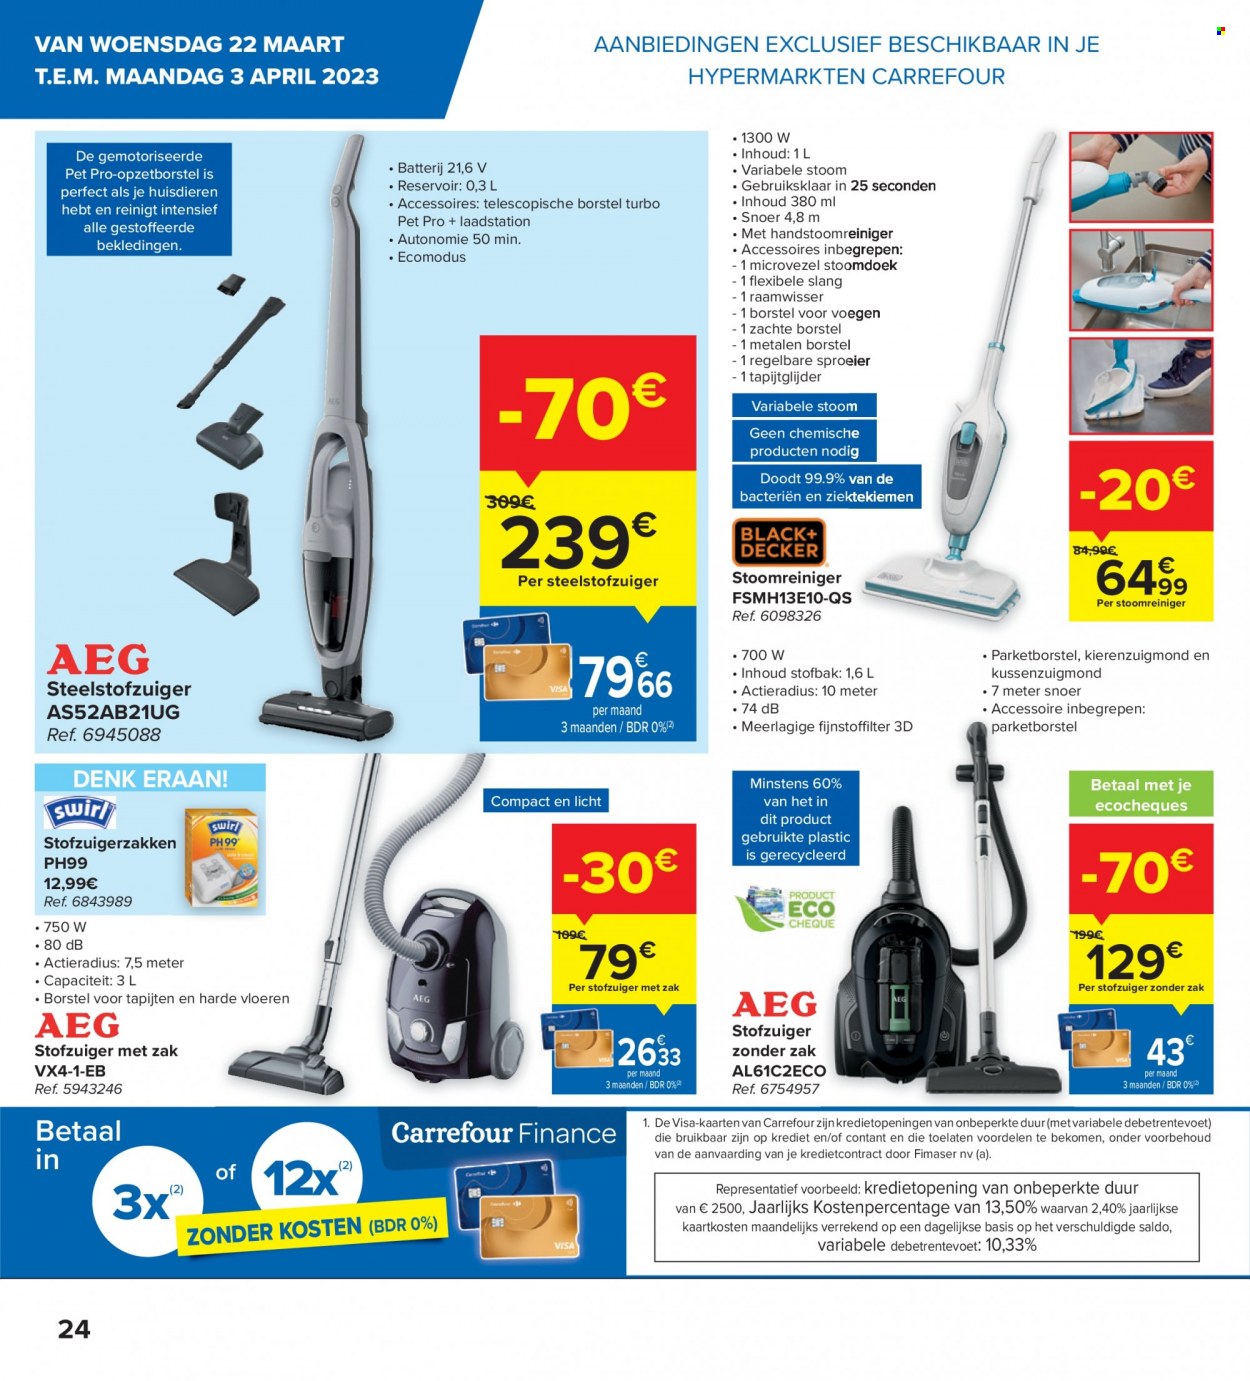 Catalogue Carrefour hypermarkt - 22.3.2023 - 3.4.2023. Page 4.